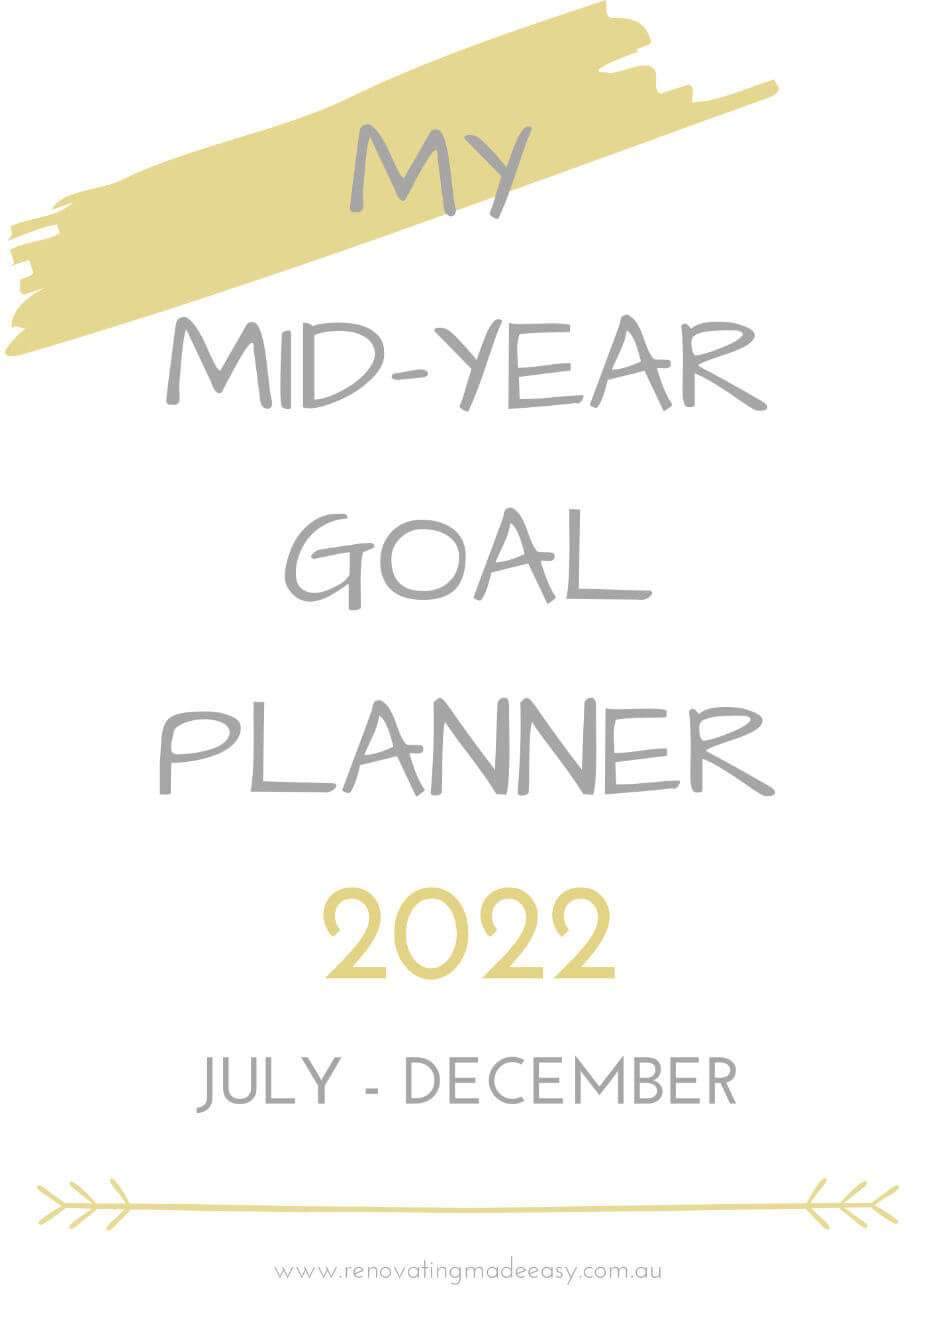 Renovating Made Easy - Mid Year Goal Planner